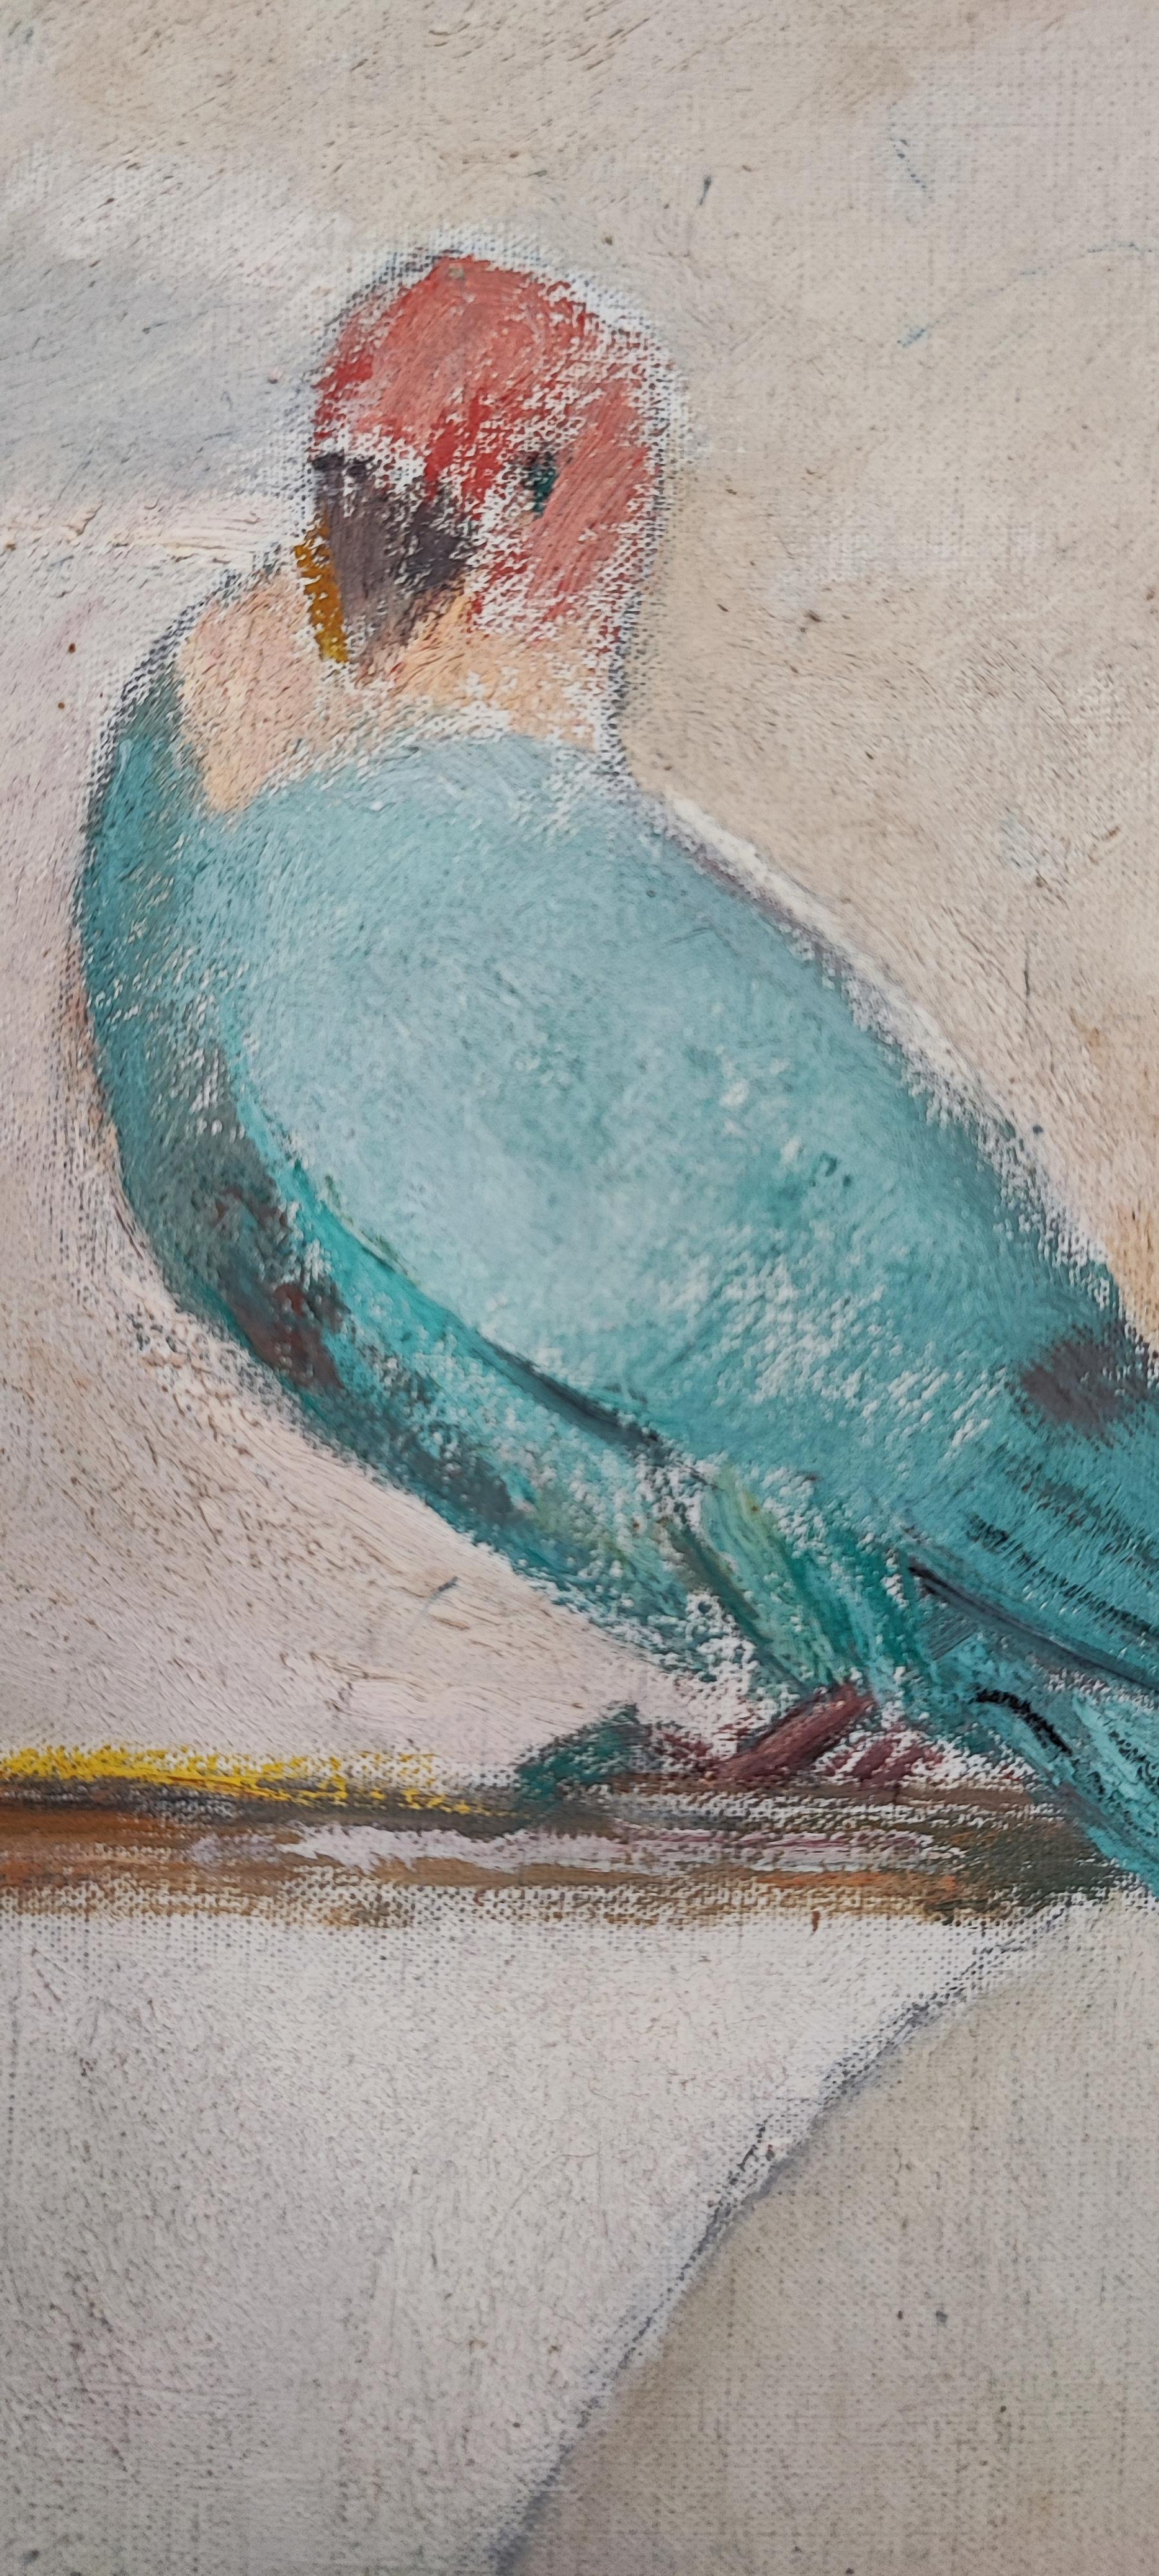 Parakeet in an interior with vase and shells 2